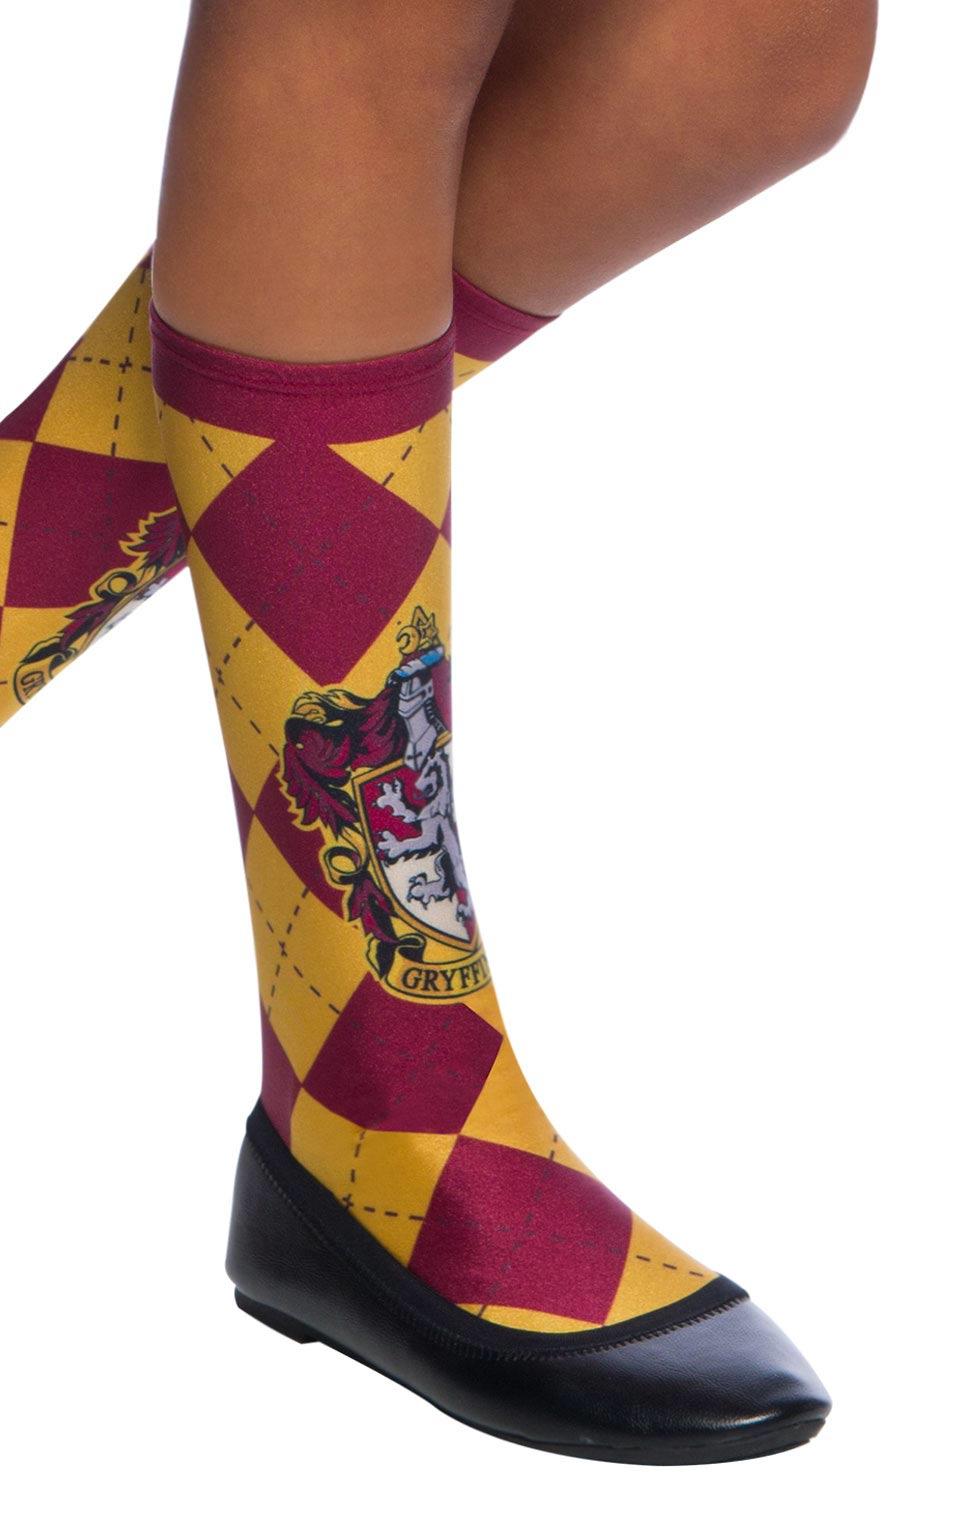 Gryffindor Socks by Rubies 39308 and fully licensed. Available from a large selection of Harry Potter costume accessories available here at Karnival Costumes online party shop